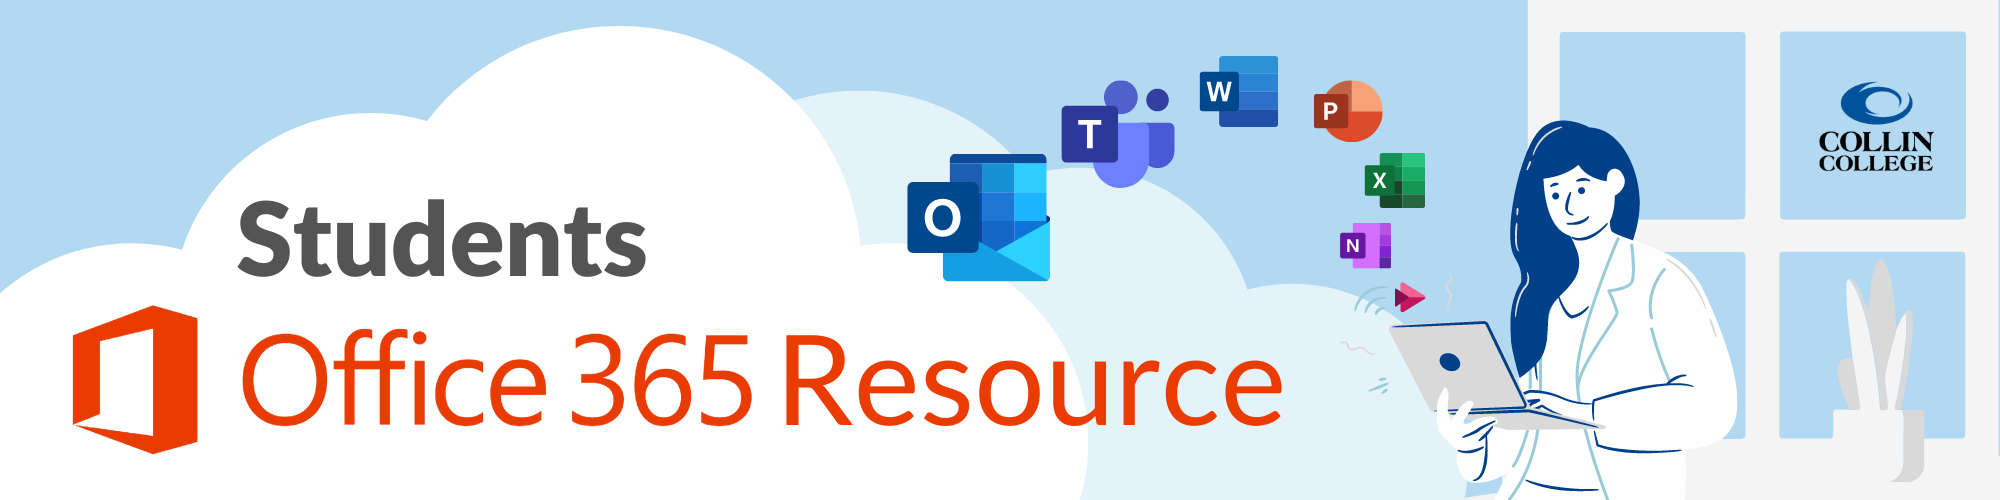 Office 365 Students Resources